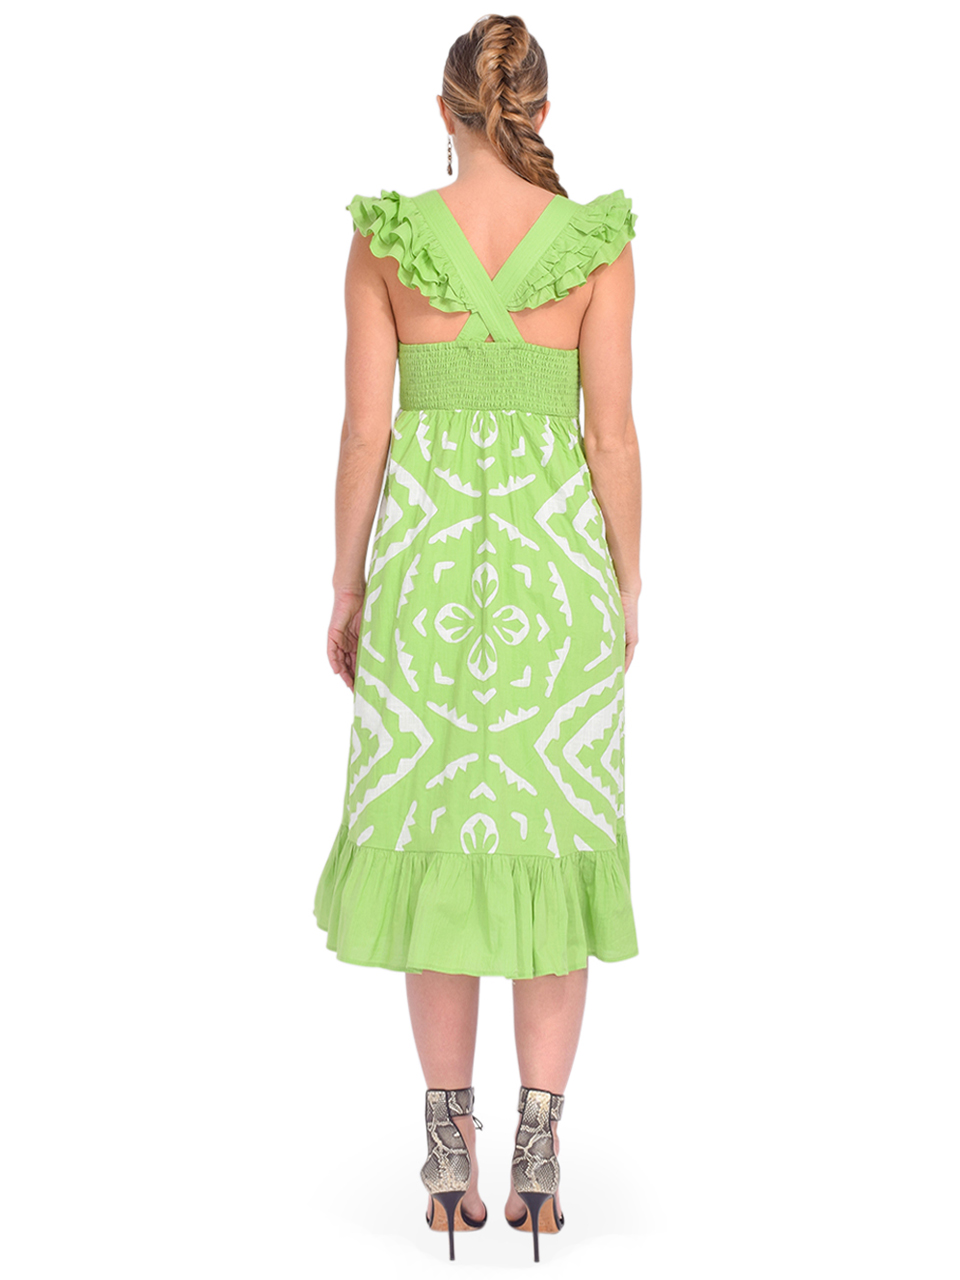 LOVE THE LABEL Arya Dress in Green/White Opaline Back View